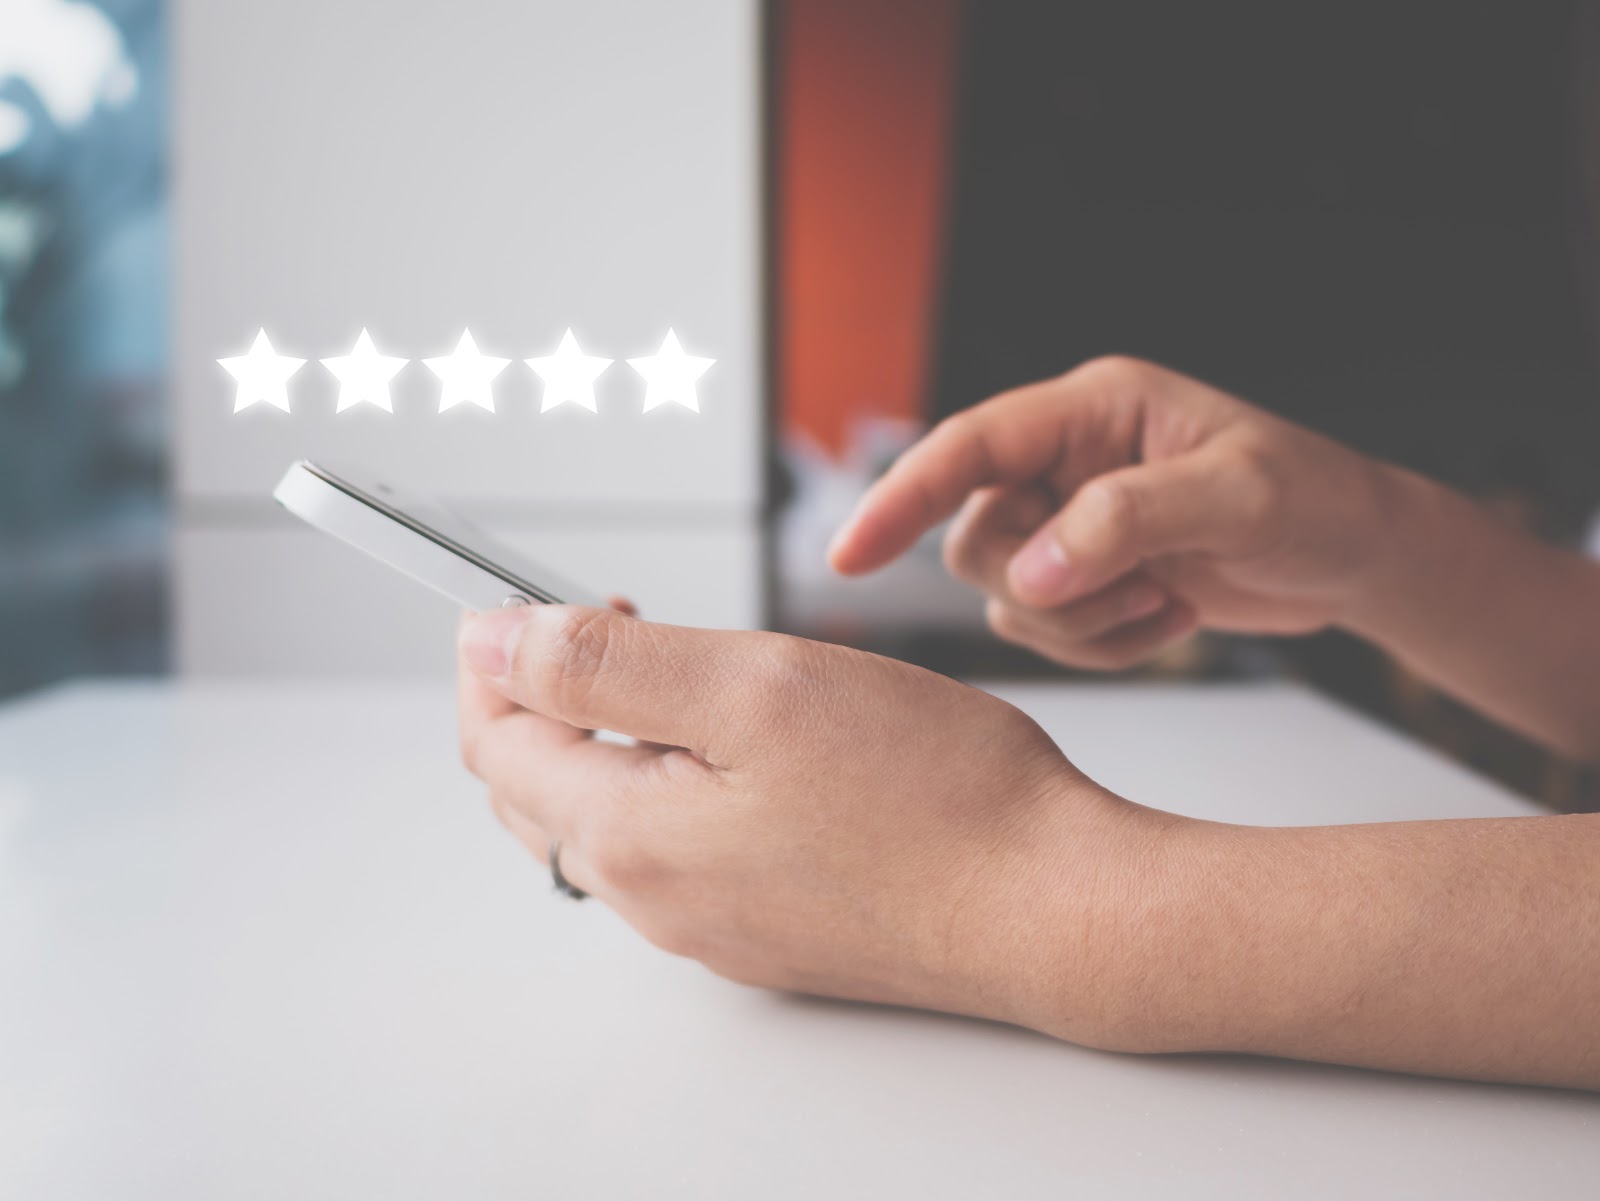 a high star rating will attract new patients